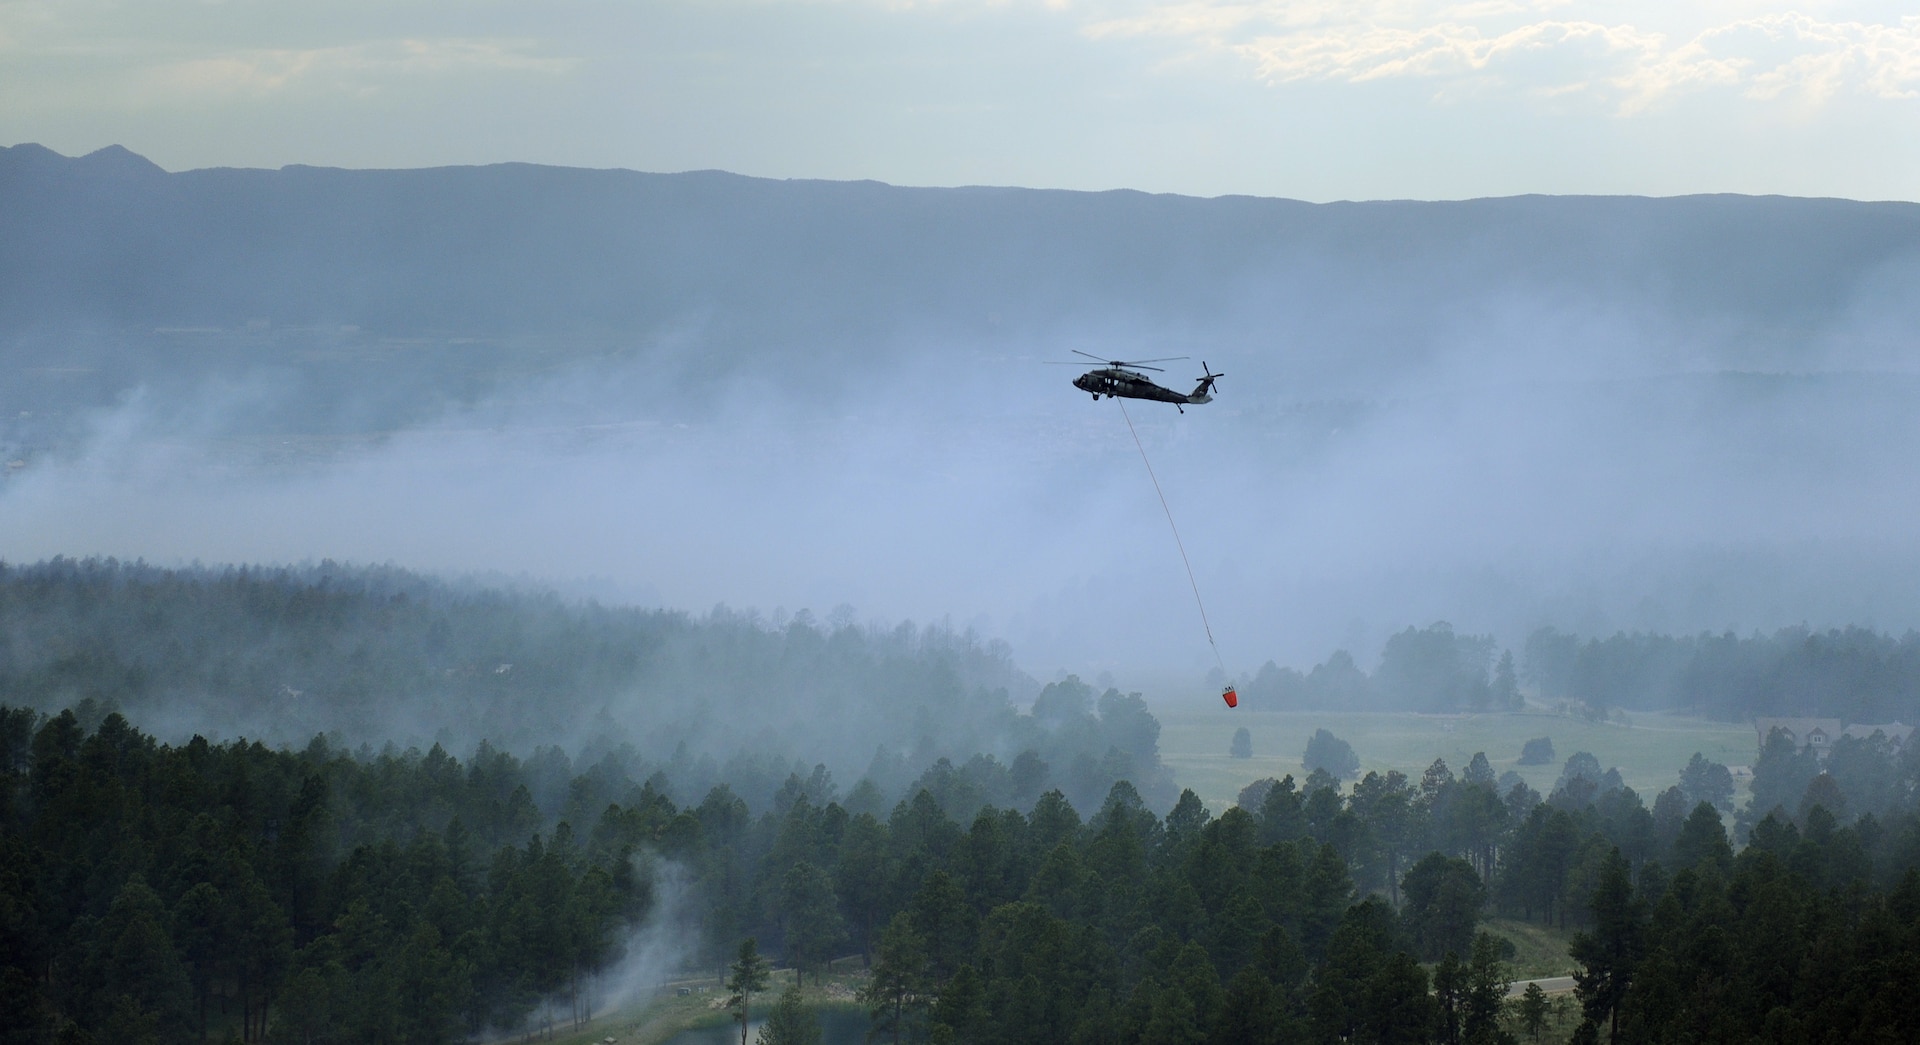 A UH-60 Black Hawk helicopter carries water over the Black Forest Fire June 13, 2013. Two Black Hawks and two CH-47 Chinooks are using the Air Force Academy Airfield as a refueling and staging area for ongoing firefighting operations. (U.S. Air Force photo/Capt. Richard Ricciardi)